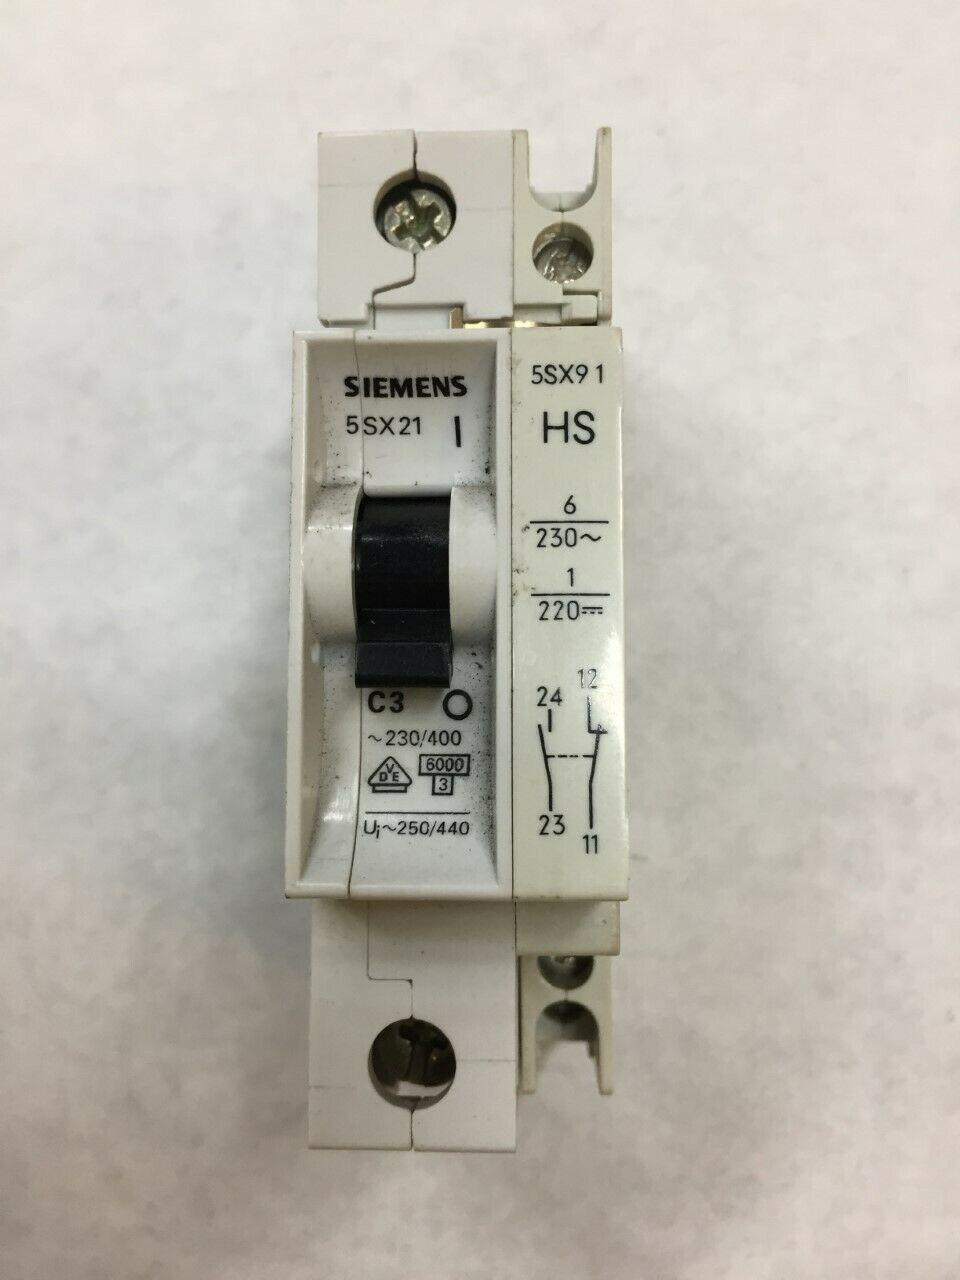 Details about   SIEMENS 3A 230/400V CIRCUIT BREAKER LOT OF 4 5SX21 C3 *PZB* 